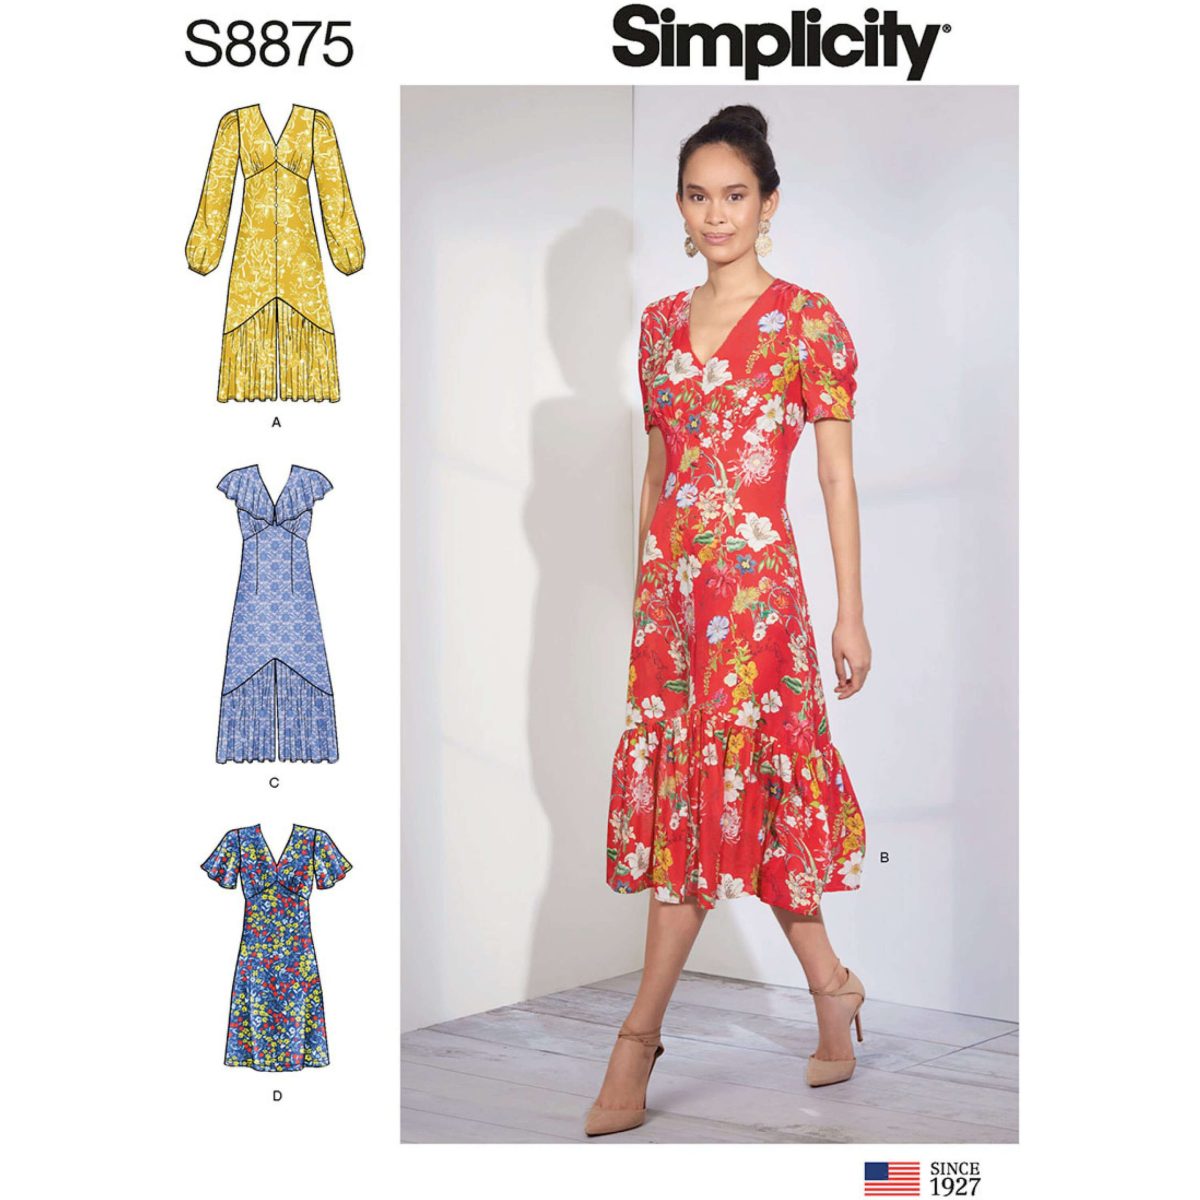 Simplicity Sewing Pattern S8875 Misses’ Dresses - Sewdirect